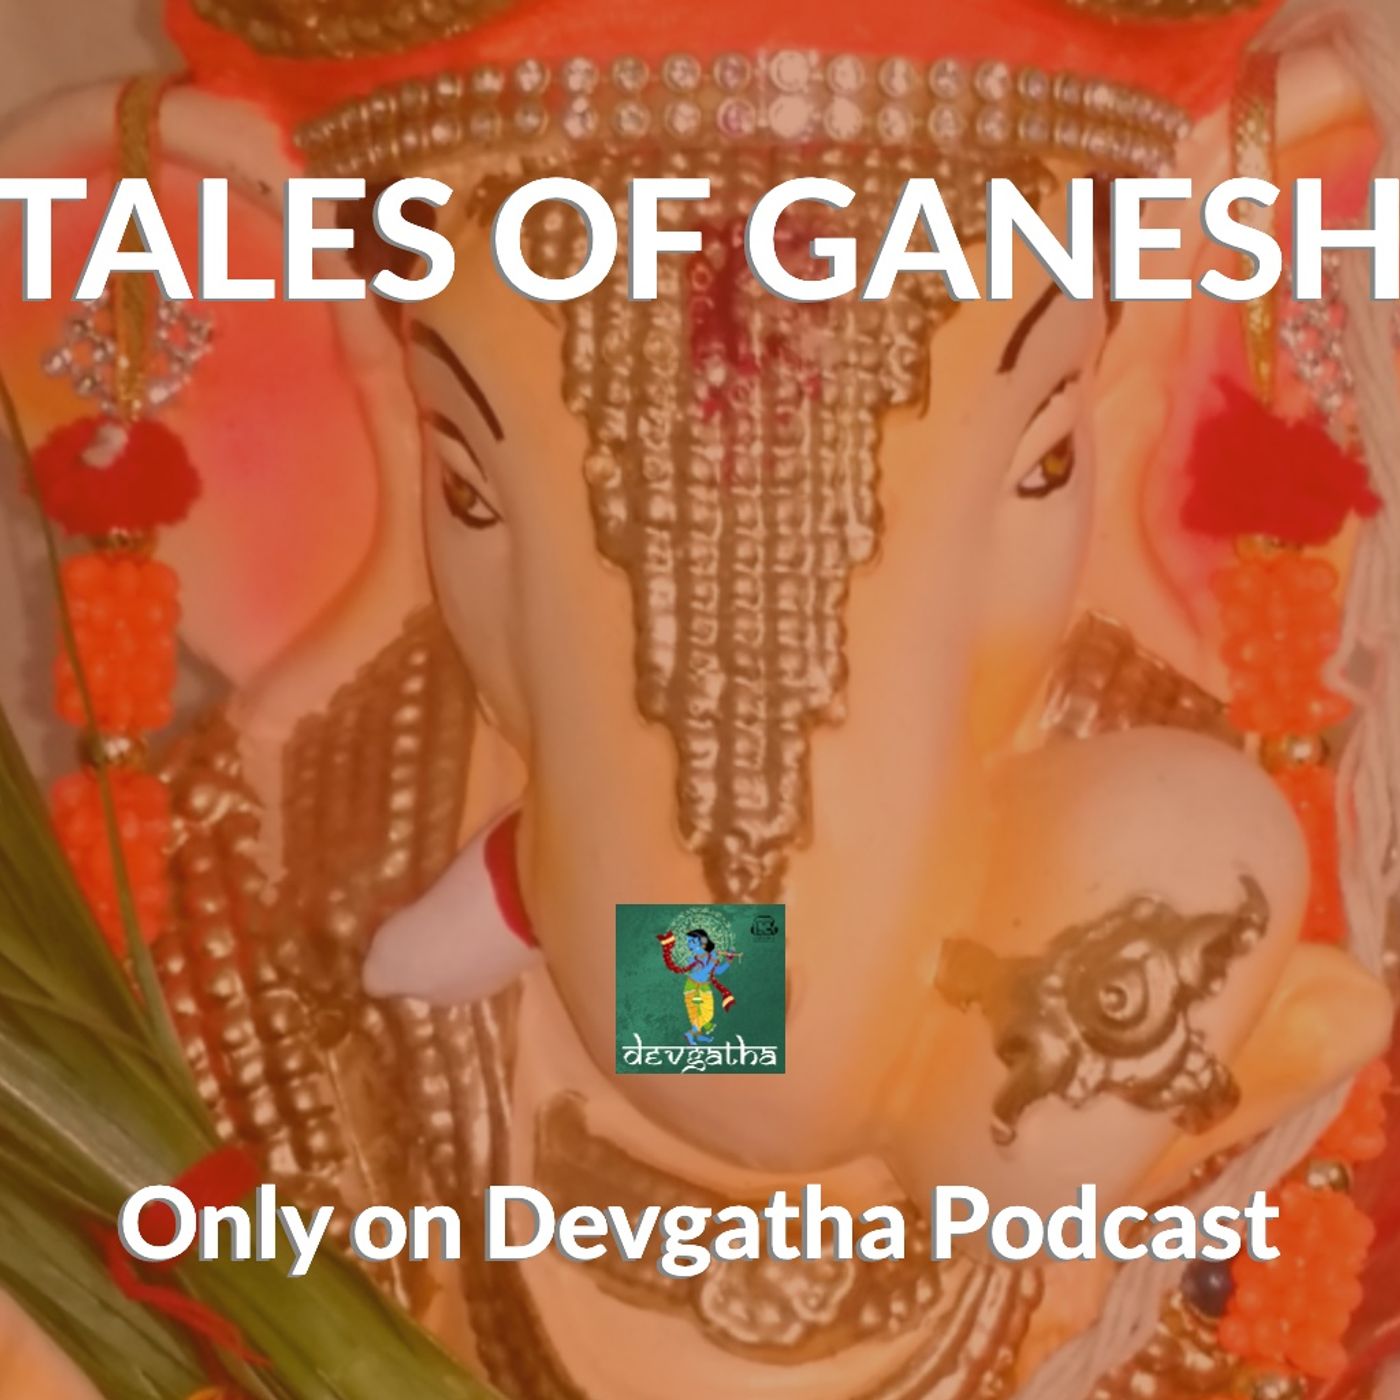 Ganesh and the Fruit of Wisdom